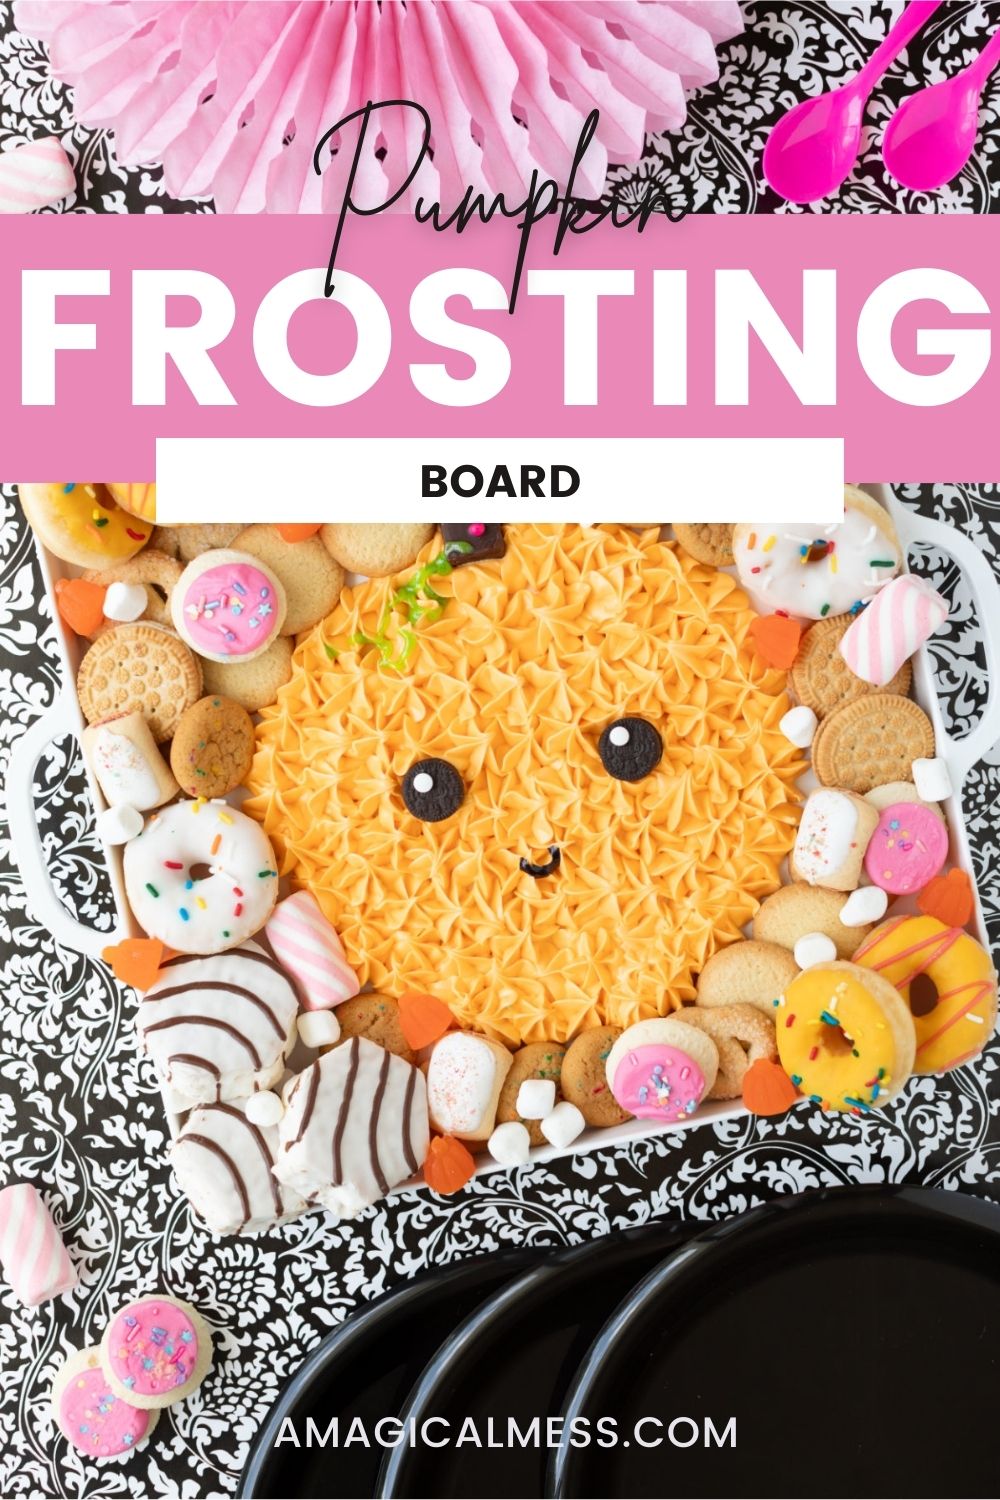 Cute frosting pumpkin on a board with a variety of sweets and treats.